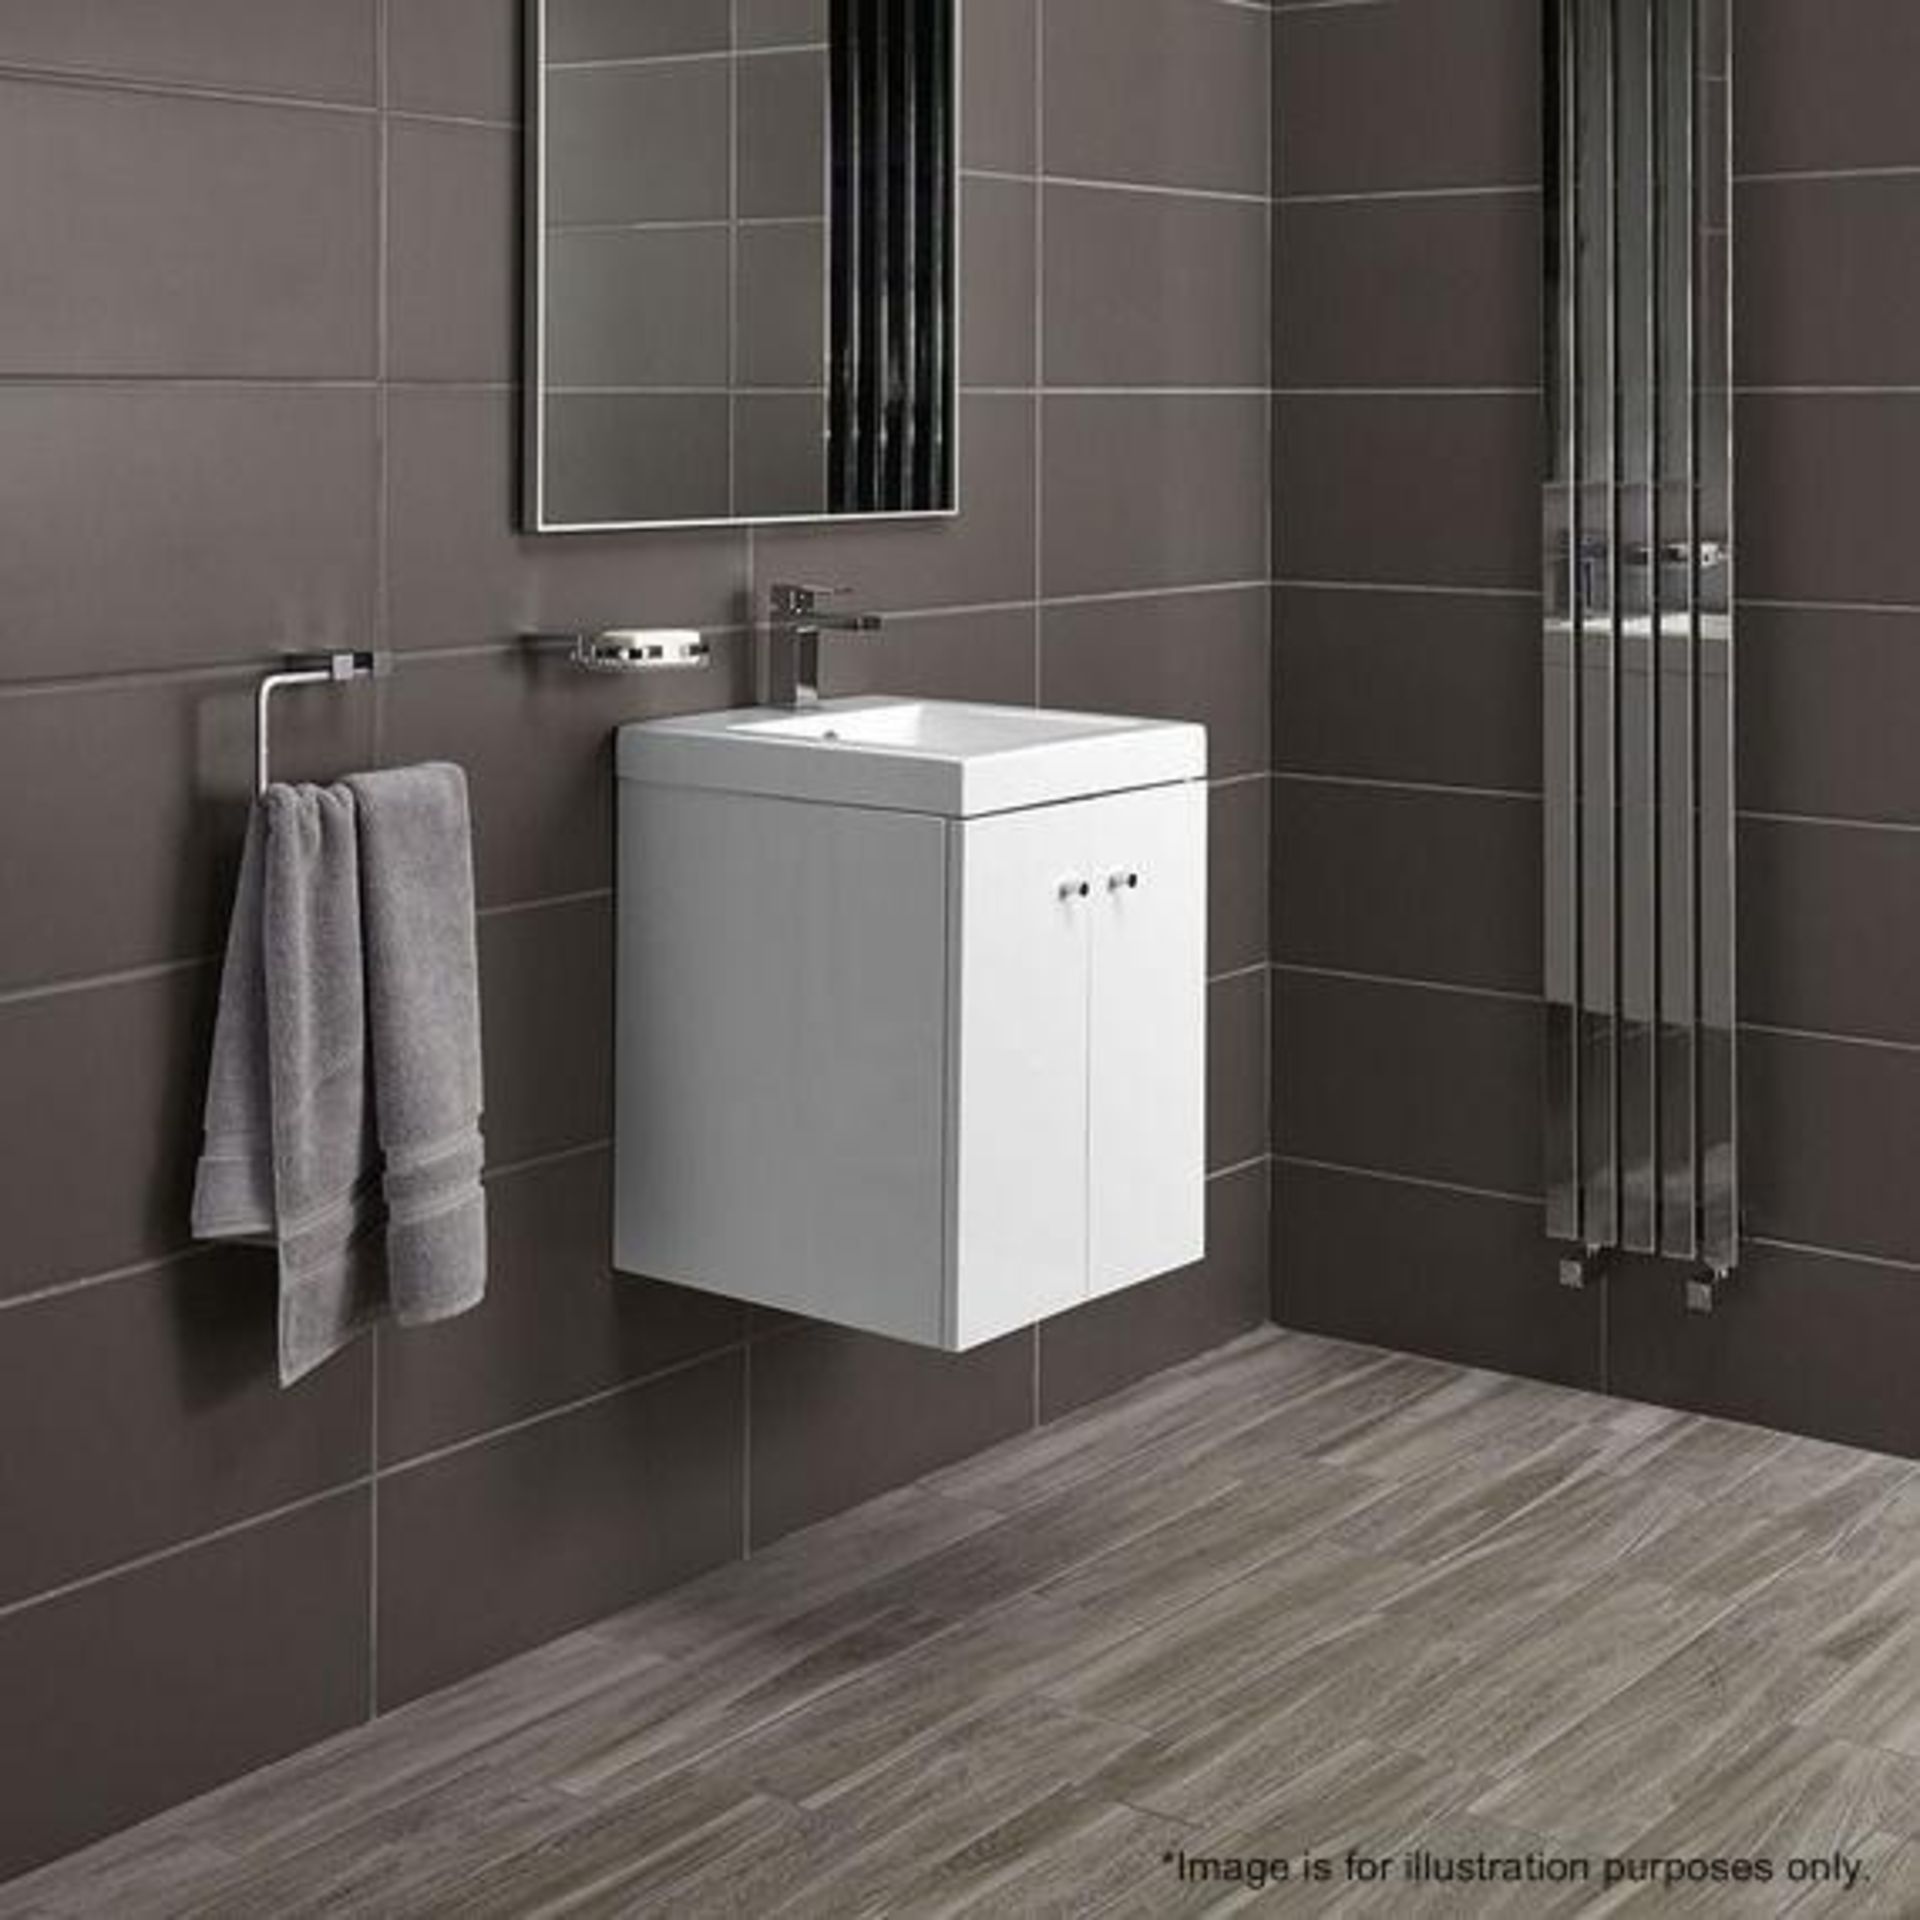 10 x Alpine Duo 400 Wall Hung Vanity Units In Gloss White - Brand New Boxed Stock - Dimensions: H49 - Image 3 of 5